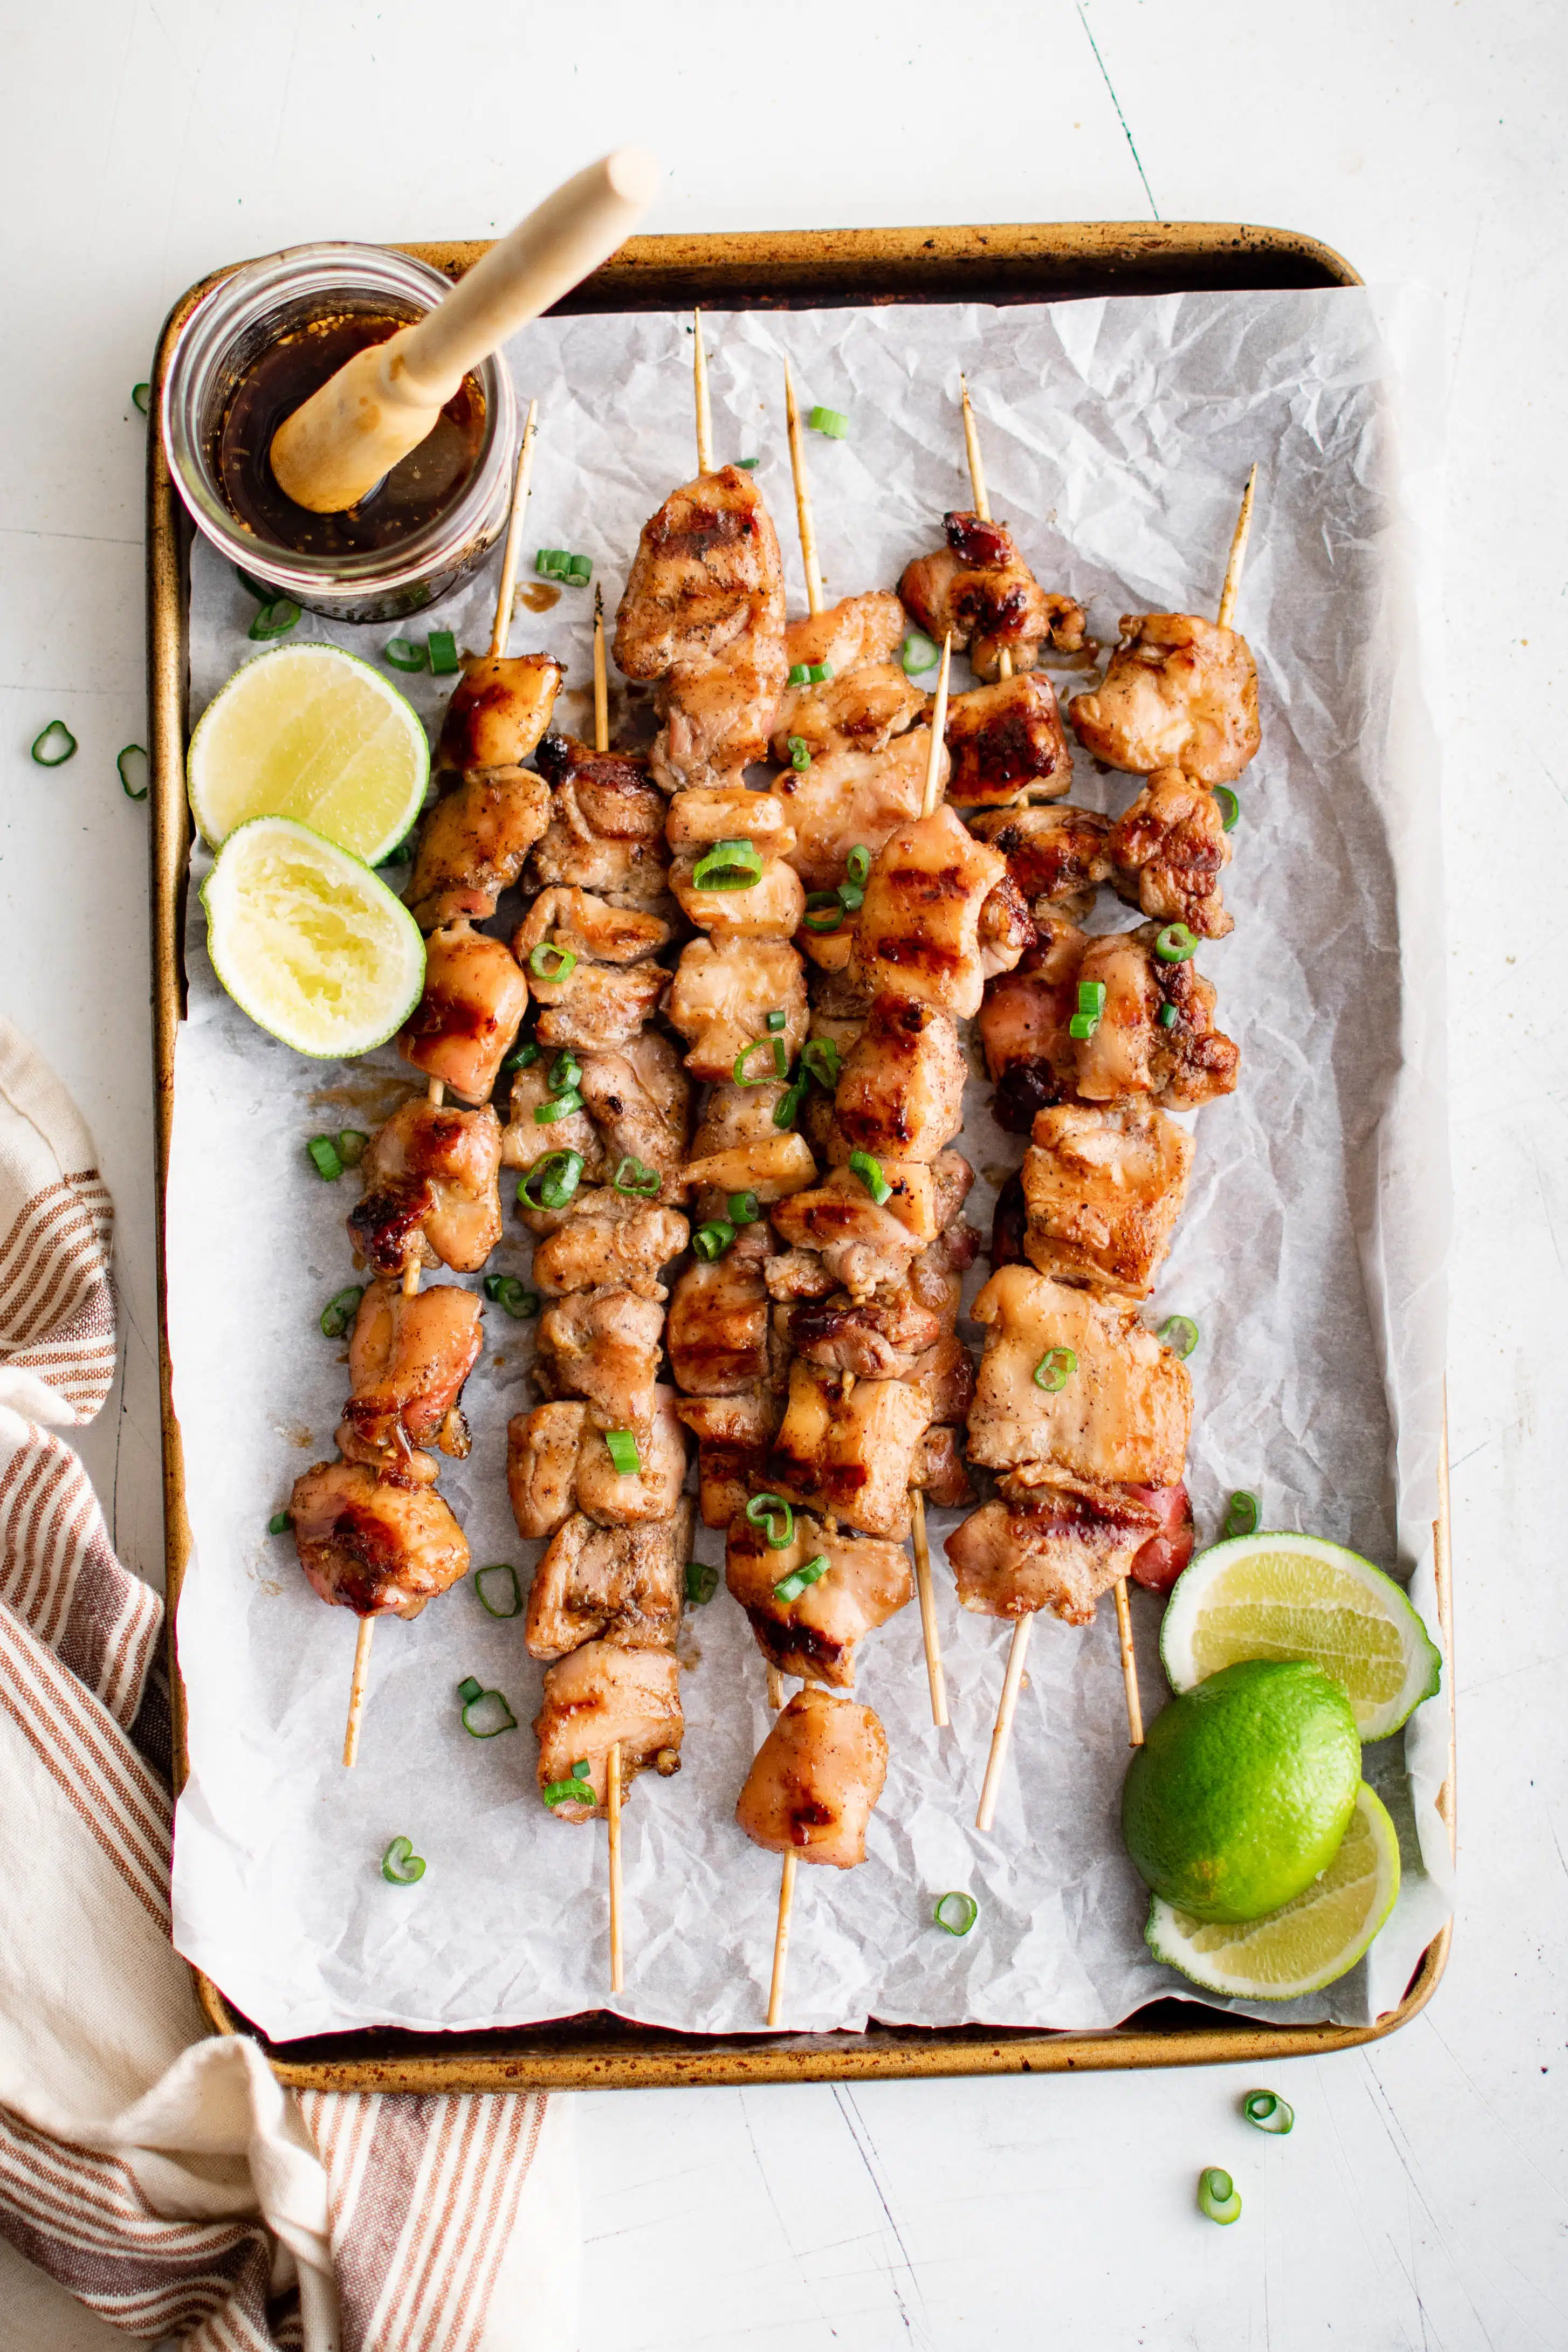 Baking sheet linked with parchment paper and topped with a stack of cooked chicken Yakitori skewers.